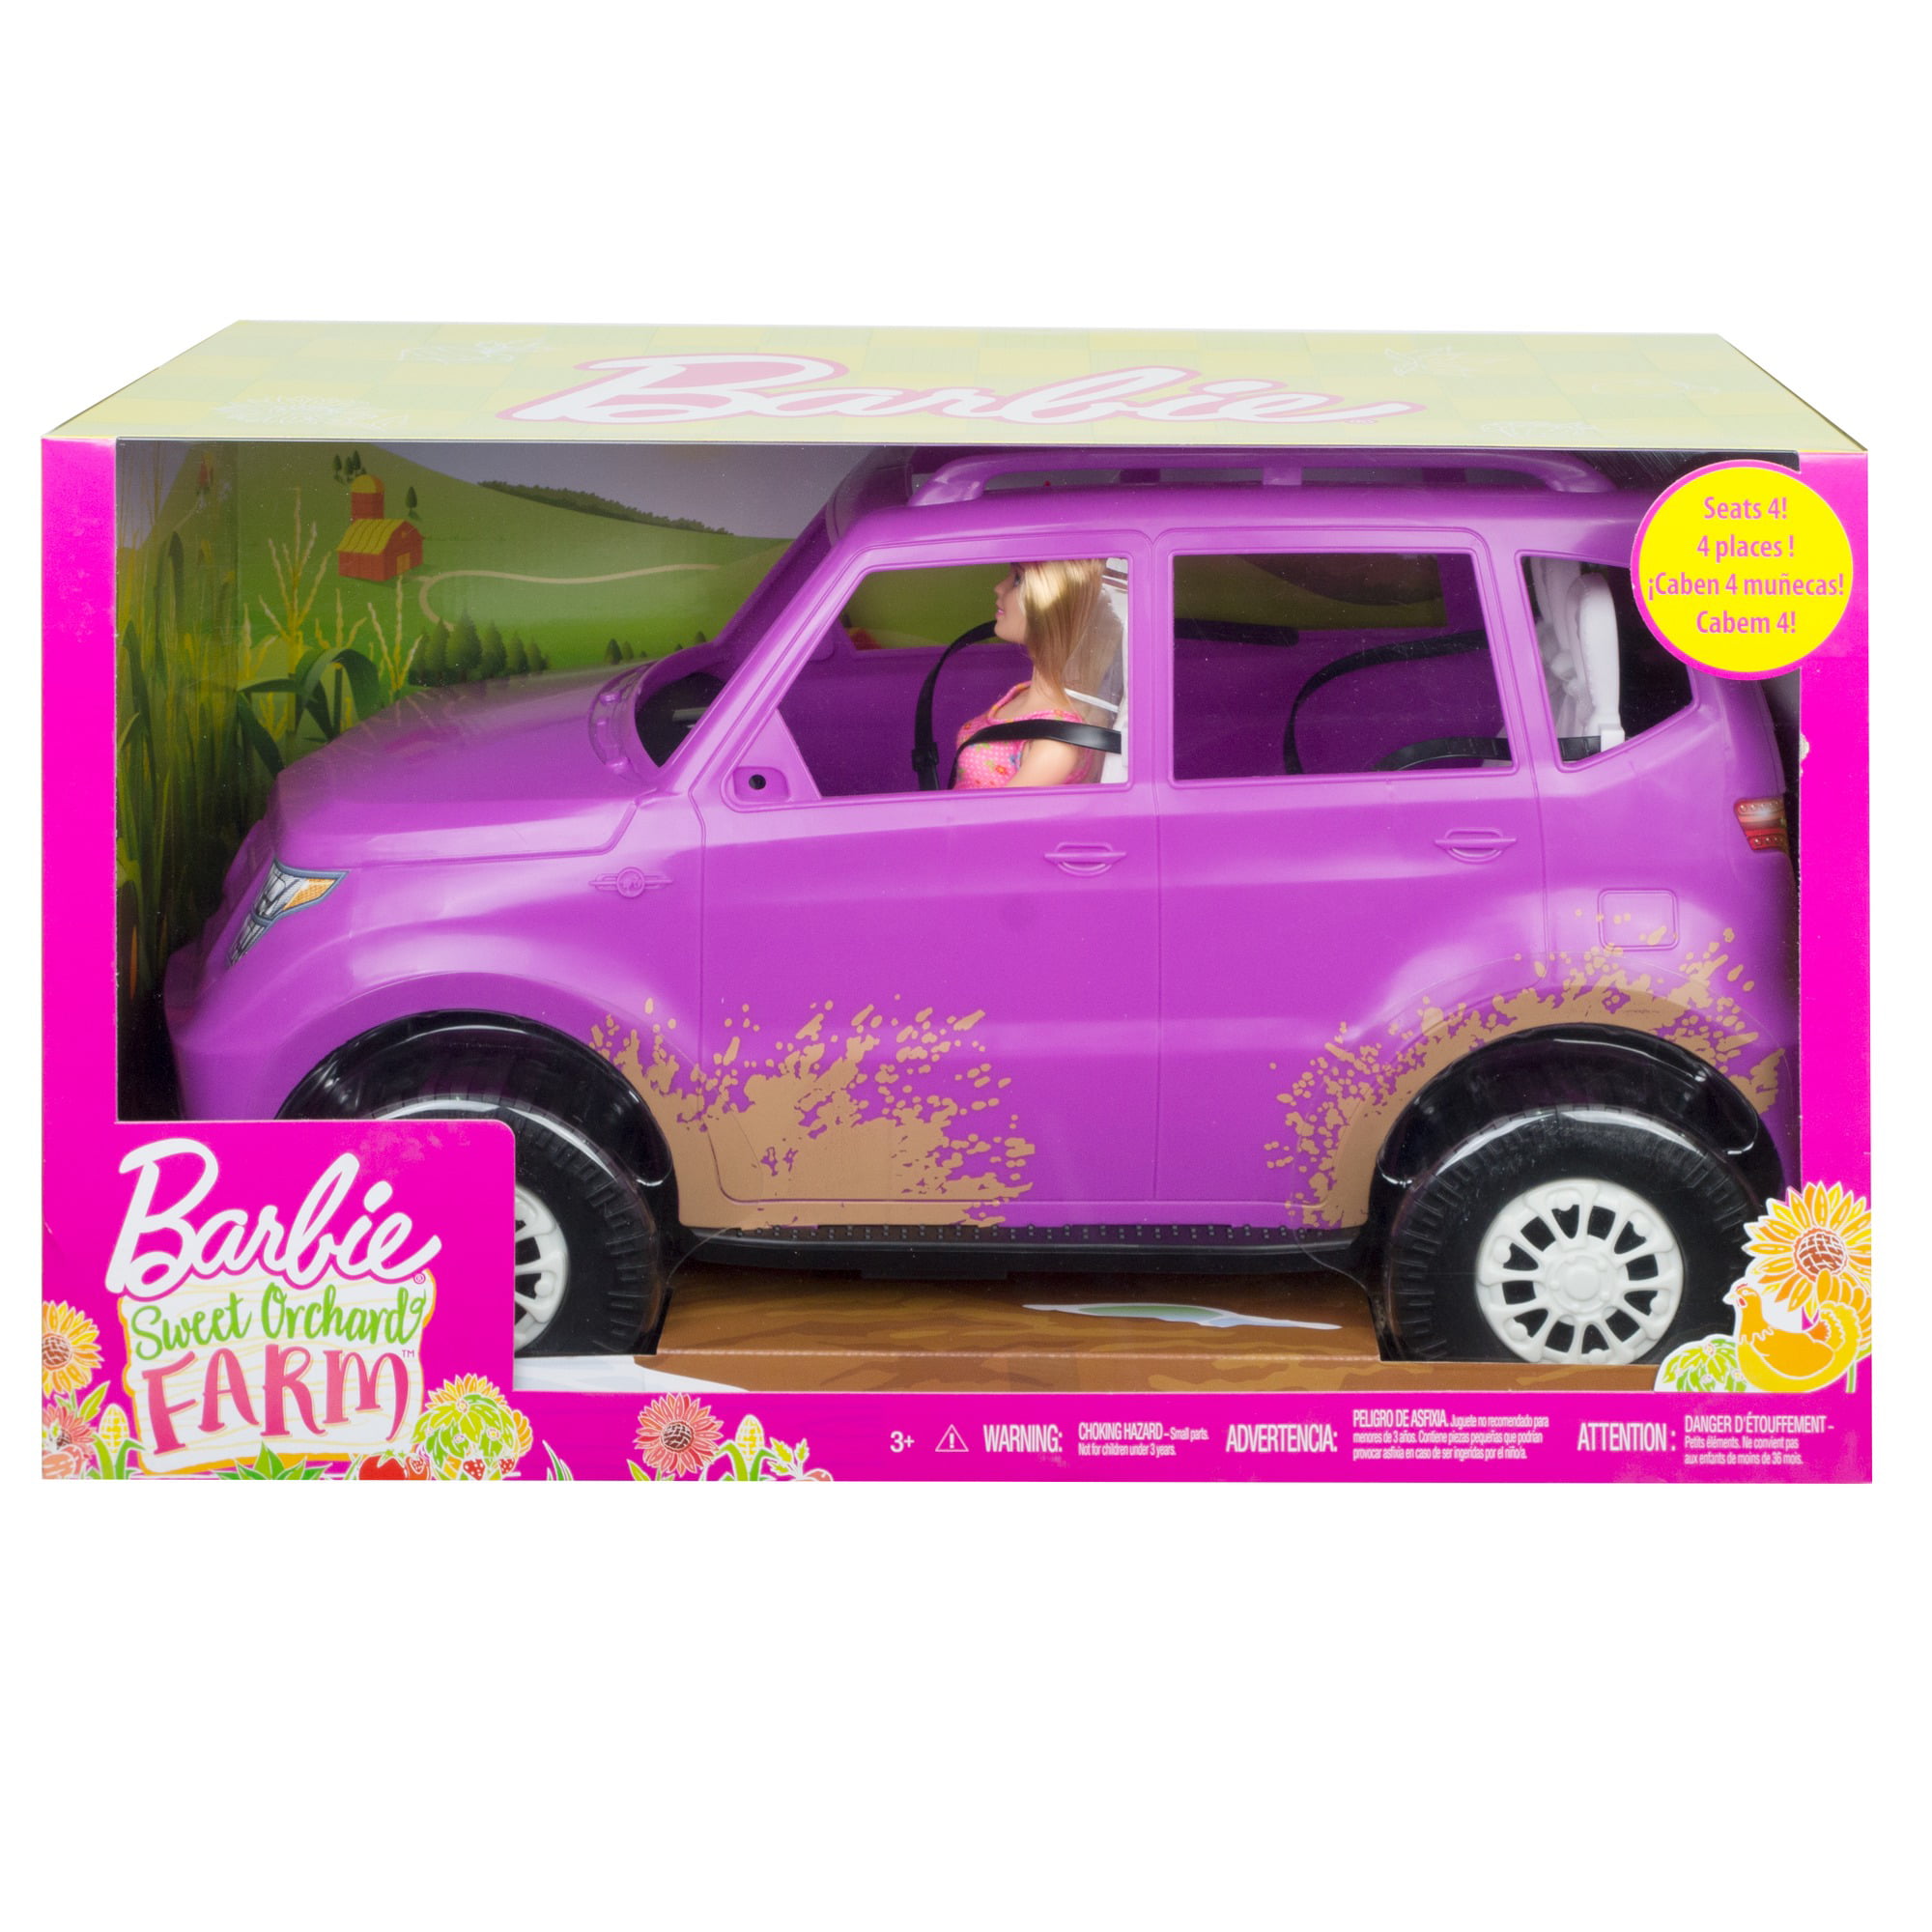 Barbie Doll and Vehicle SUV  Sweet Orchard Farm car  playset NEW 2020 